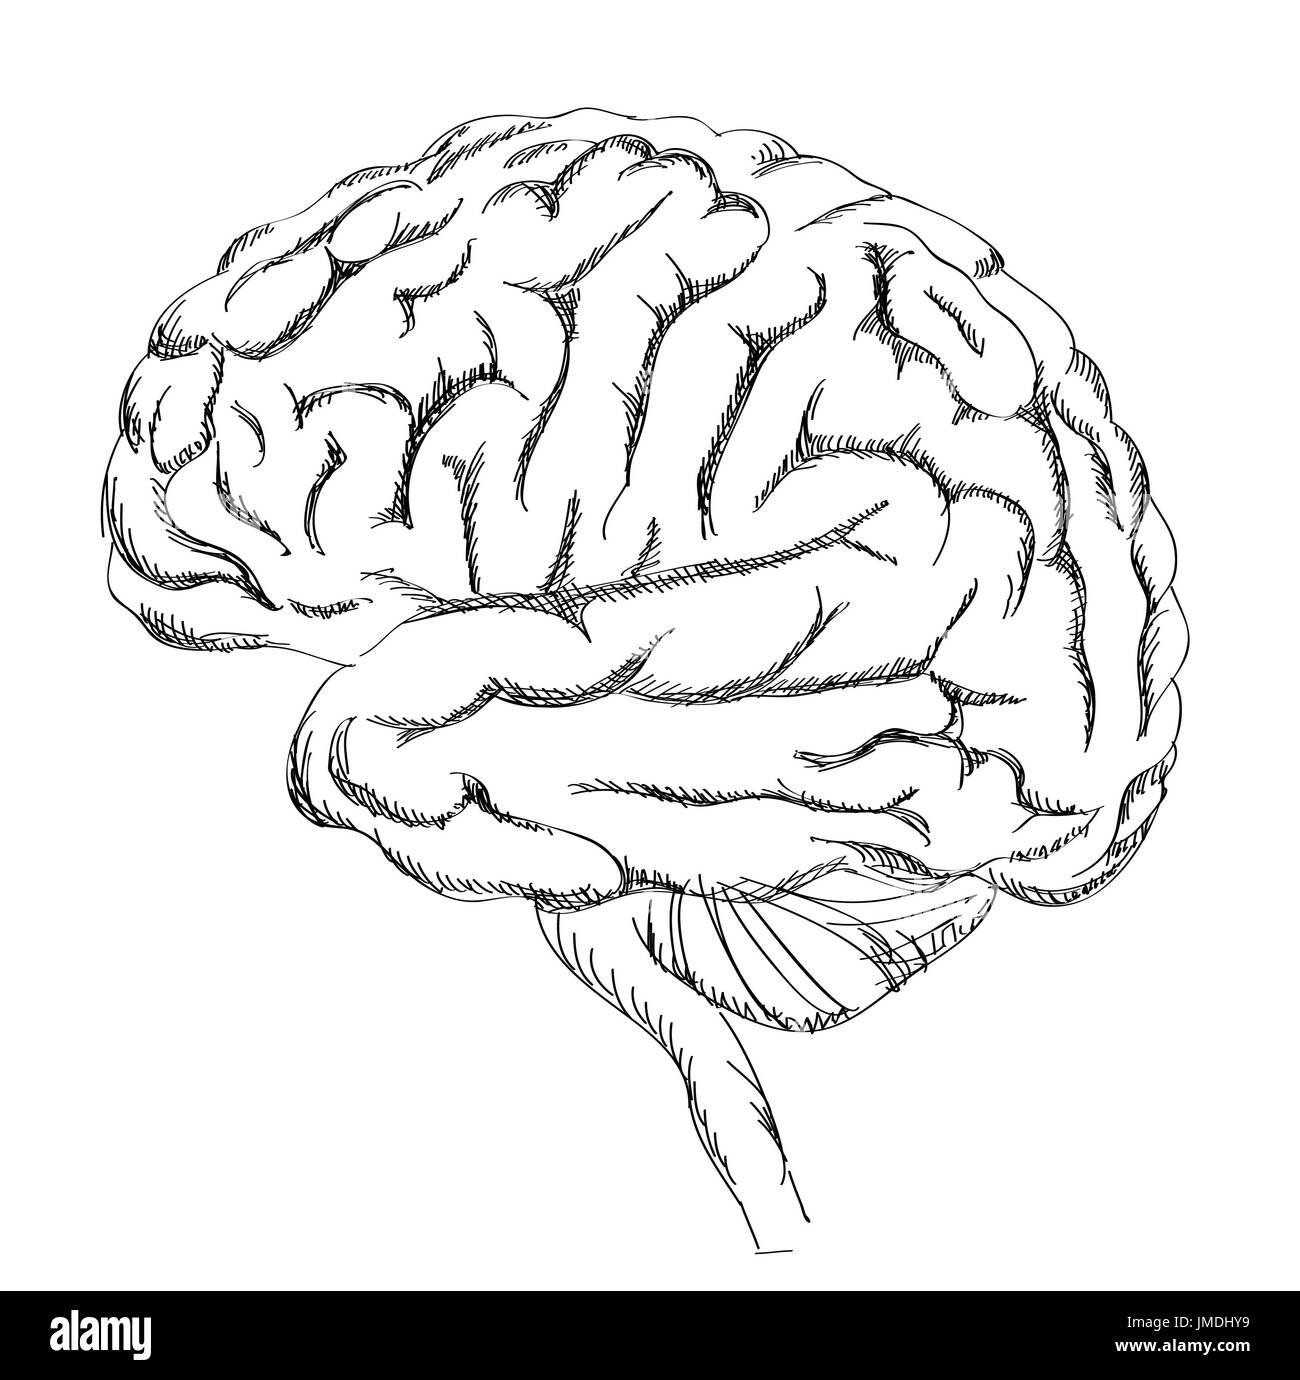 Brain anatomy. Human brain lateral view. Sketch illustration isolated on white background. Stock Photo